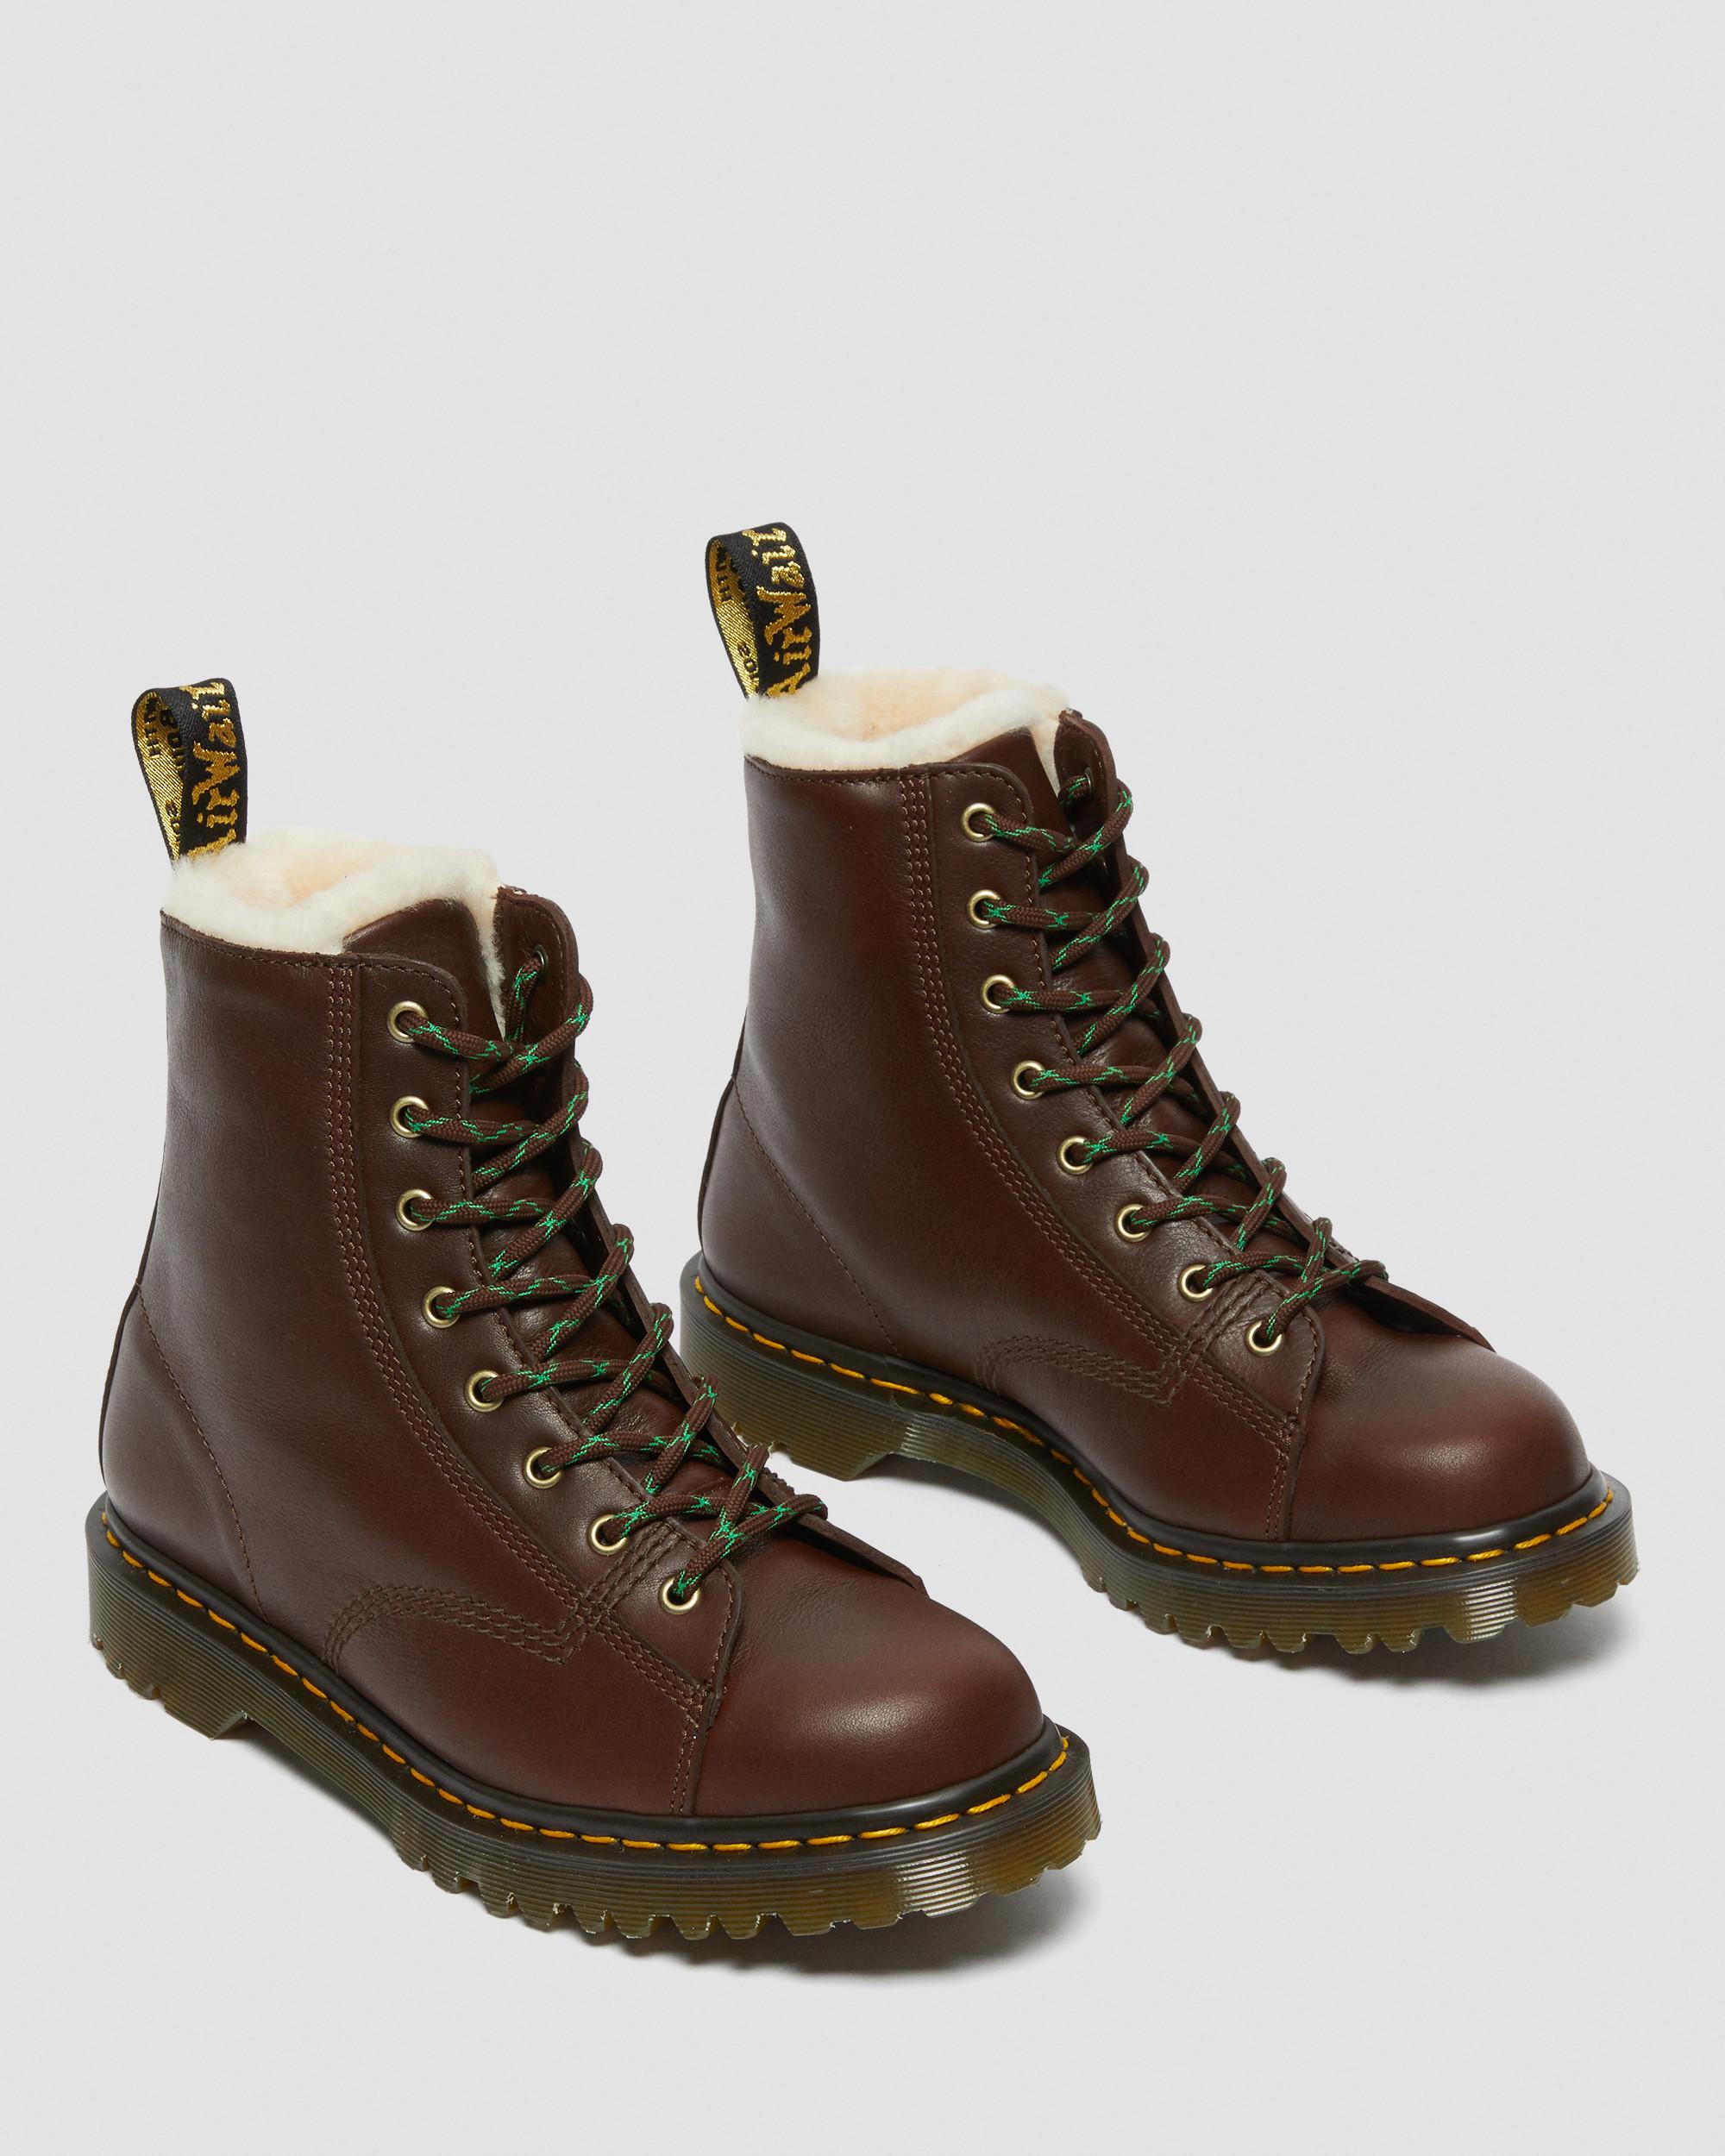 Barton Made in England Shearling Lined Leather BootsBarton Made in England  Shearling Lined Leather Boots Dr. Martens